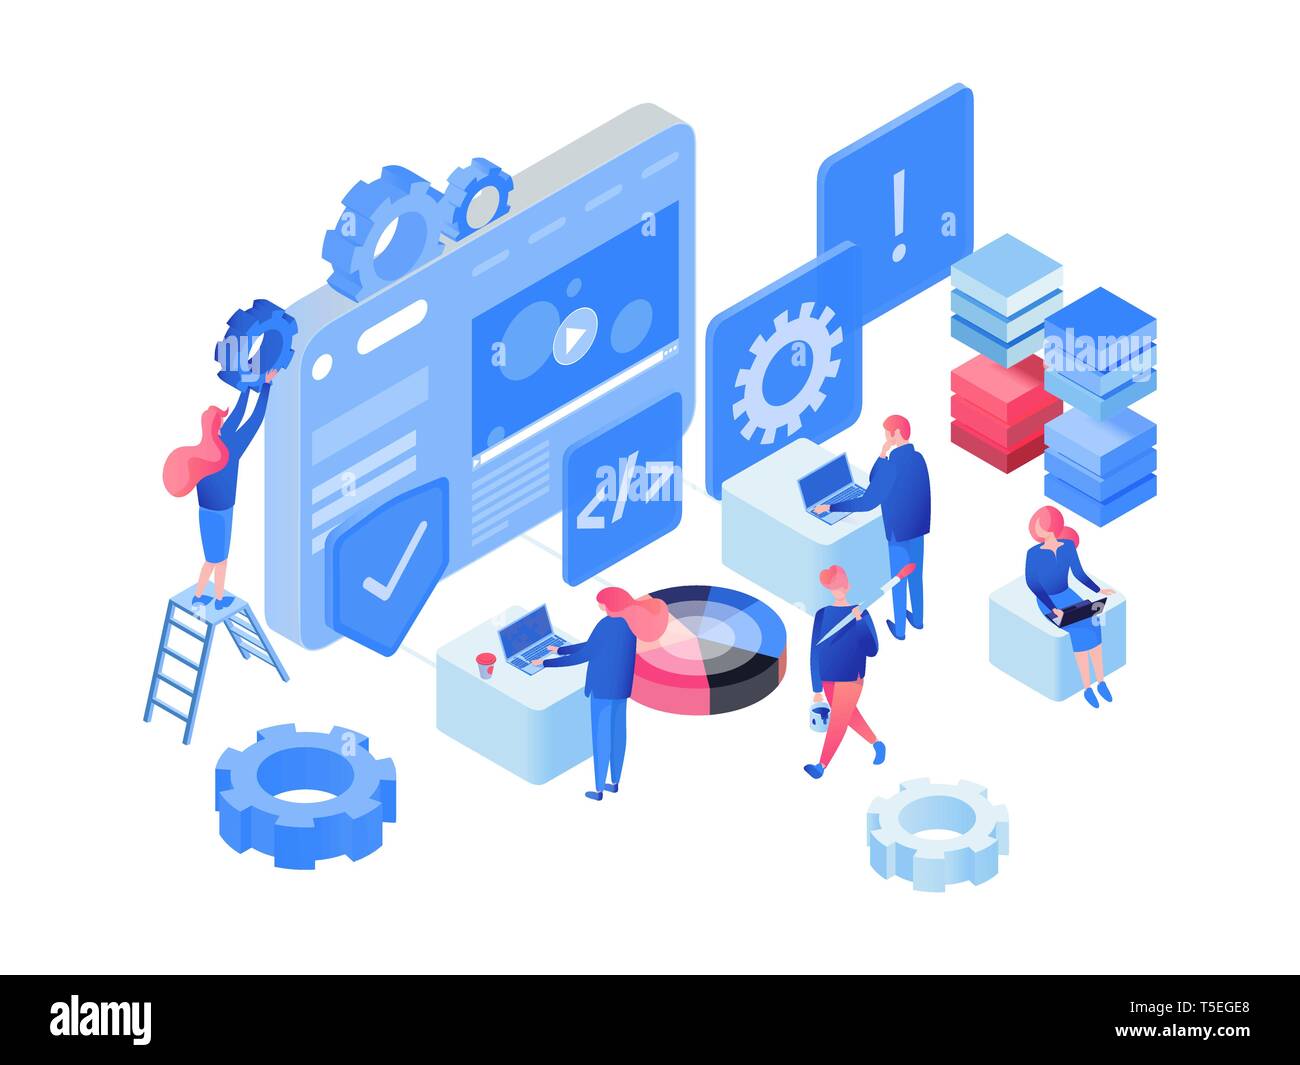 Software, web development isometric vector illustration. Programmers, developers characters coding, team working, collaborating 3D clipart. App, website optimization process isolated design element Stock Vector